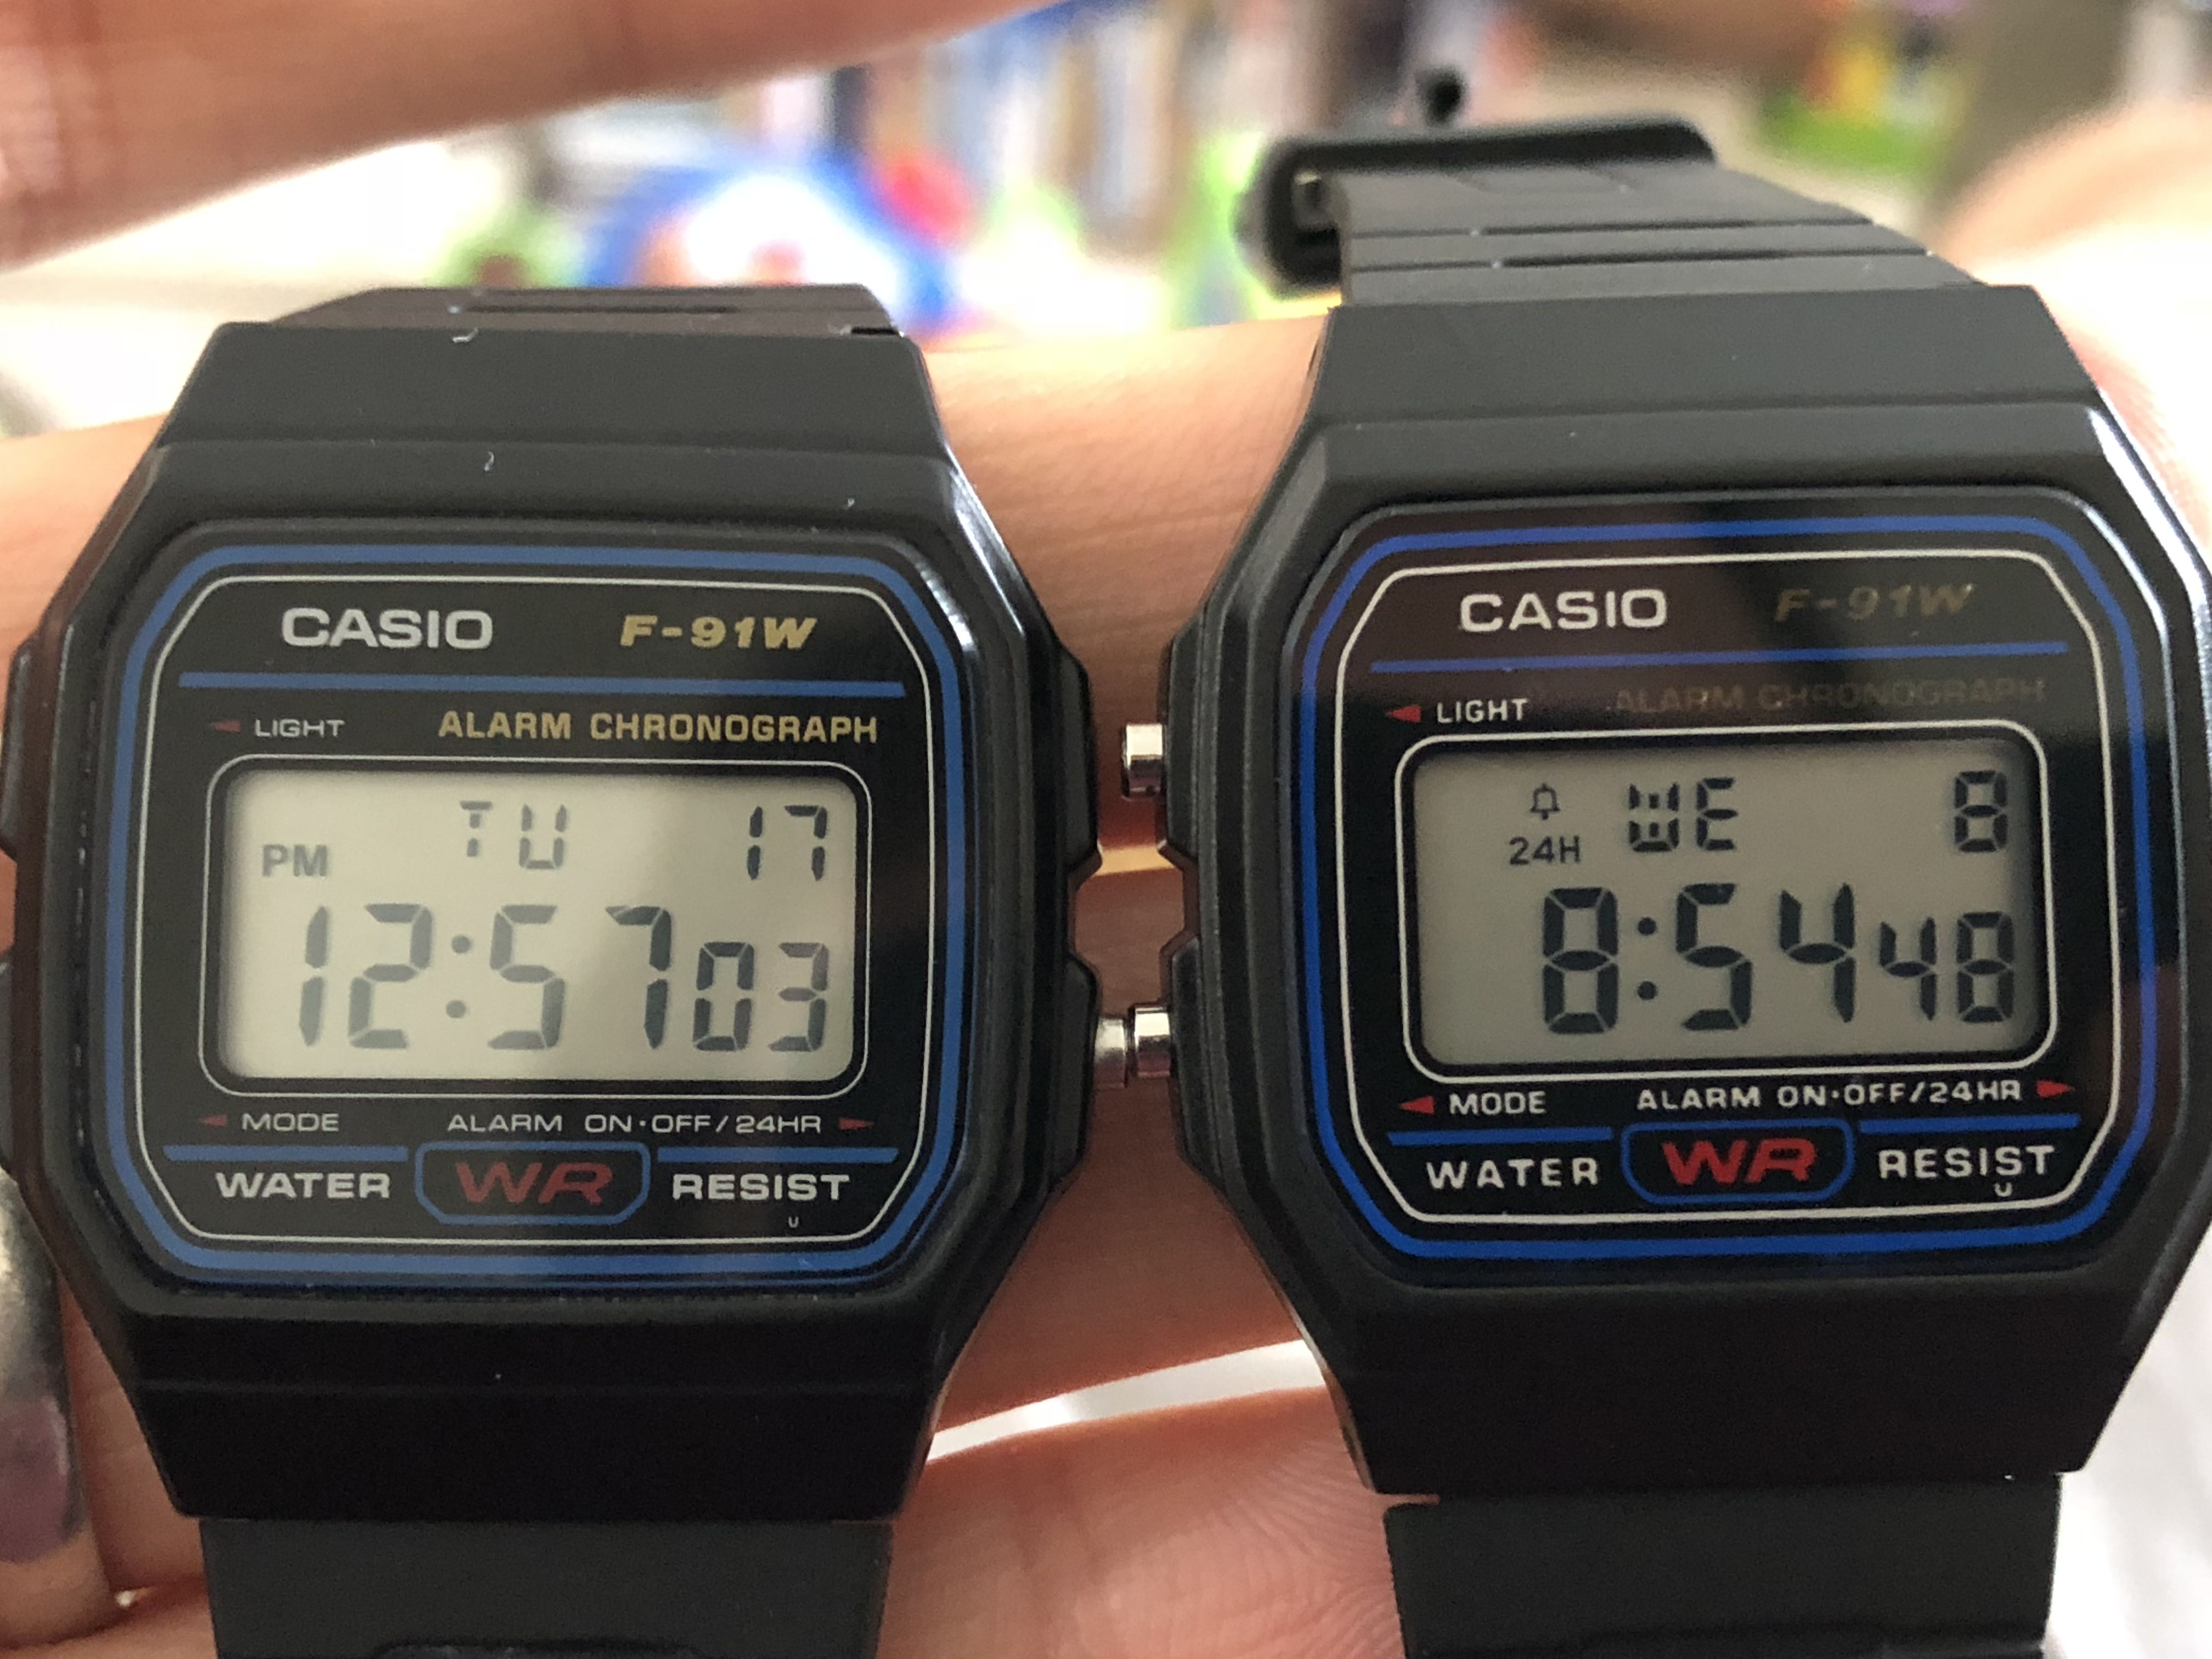 Genuine and real Casio F91-W